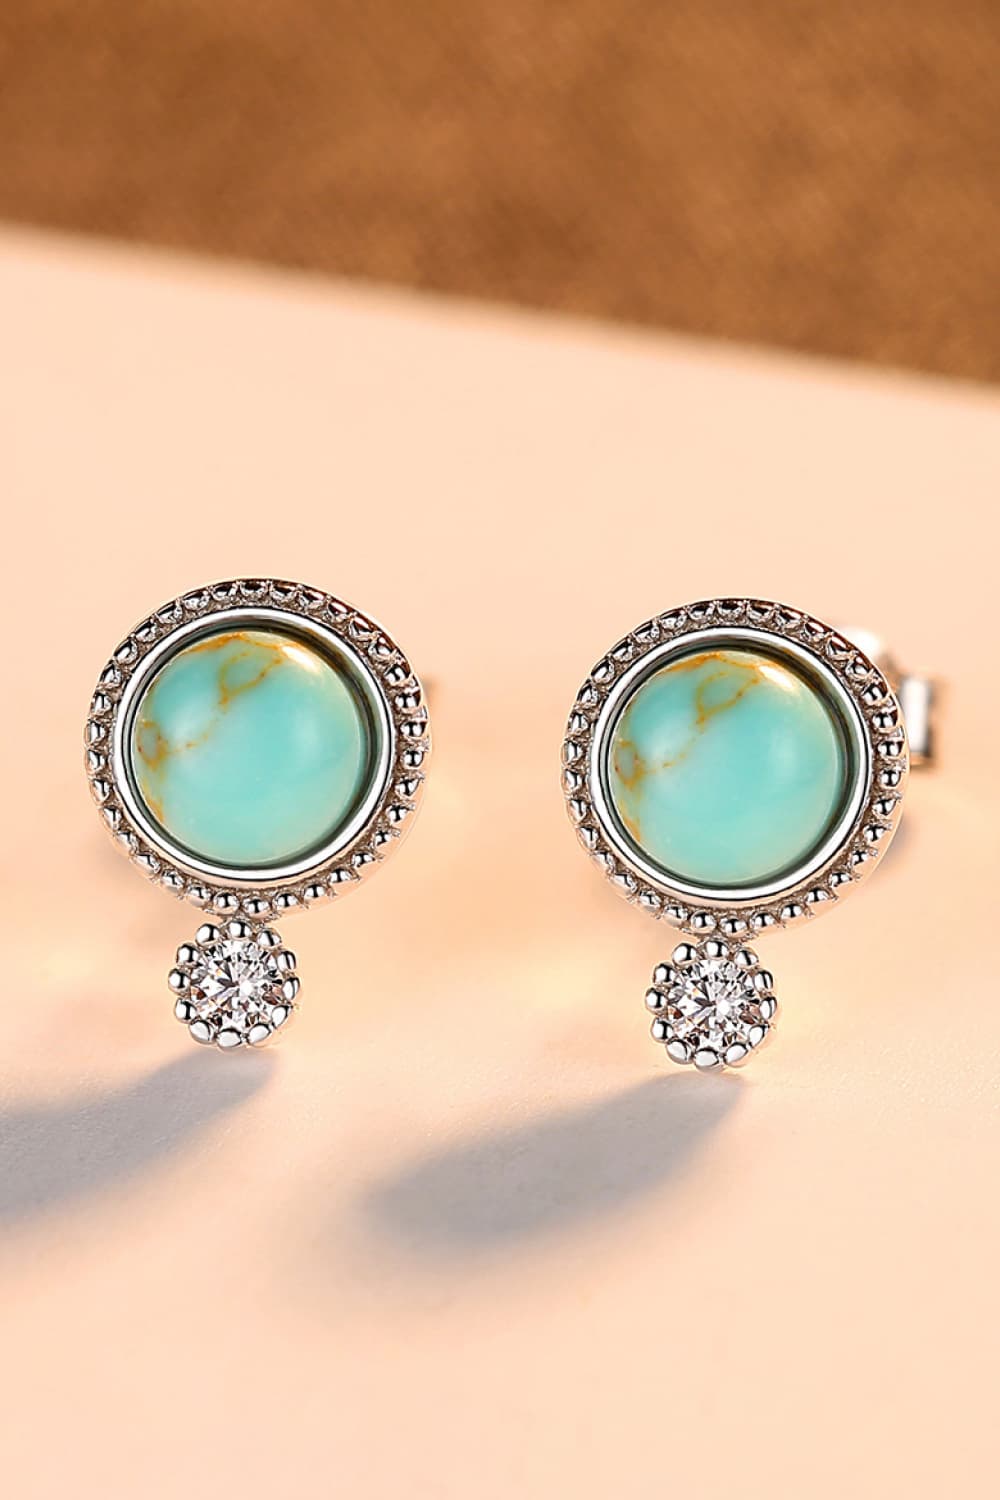 Wheat Turquoise Platinum-Plated Earrings Sentient Beauty Fashions jewelry